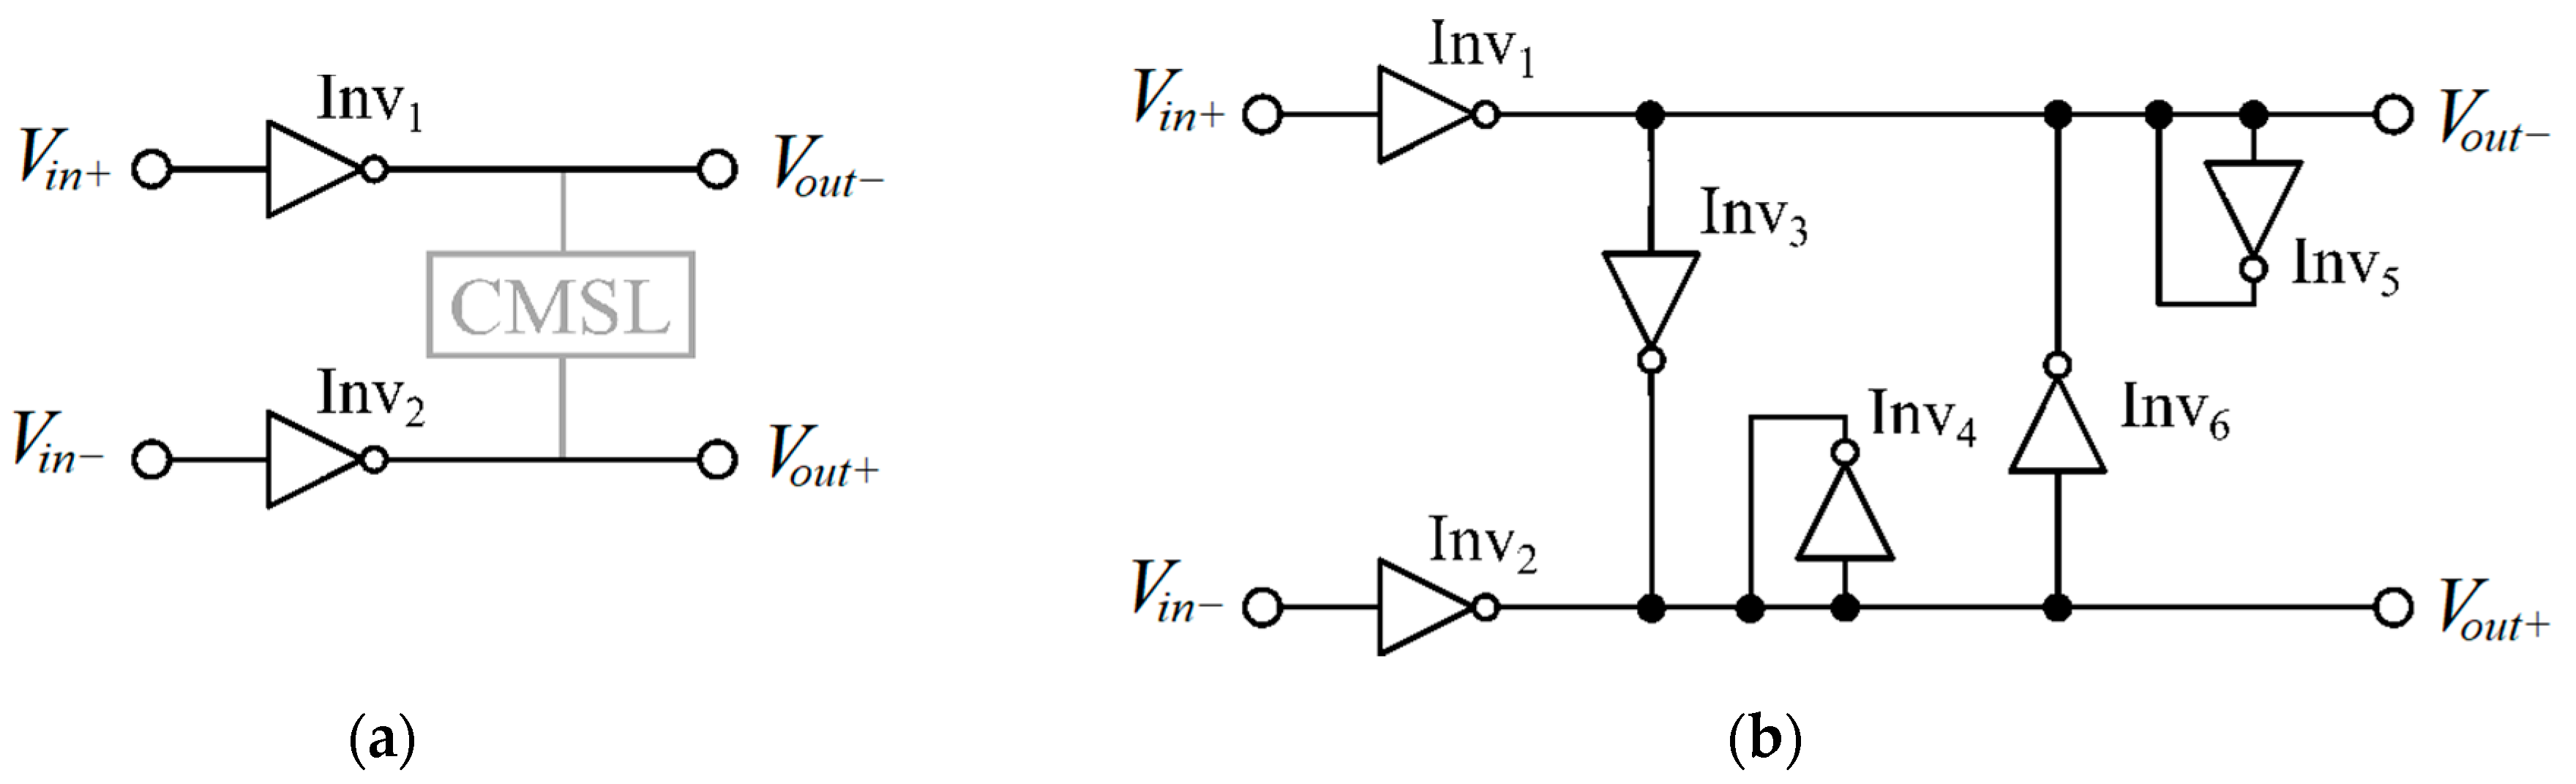 Electronics | Free Full-Text | Ultra-Low-Voltage Inverter-Based Amplifier  with Novel Common-Mode Stabilization Loop